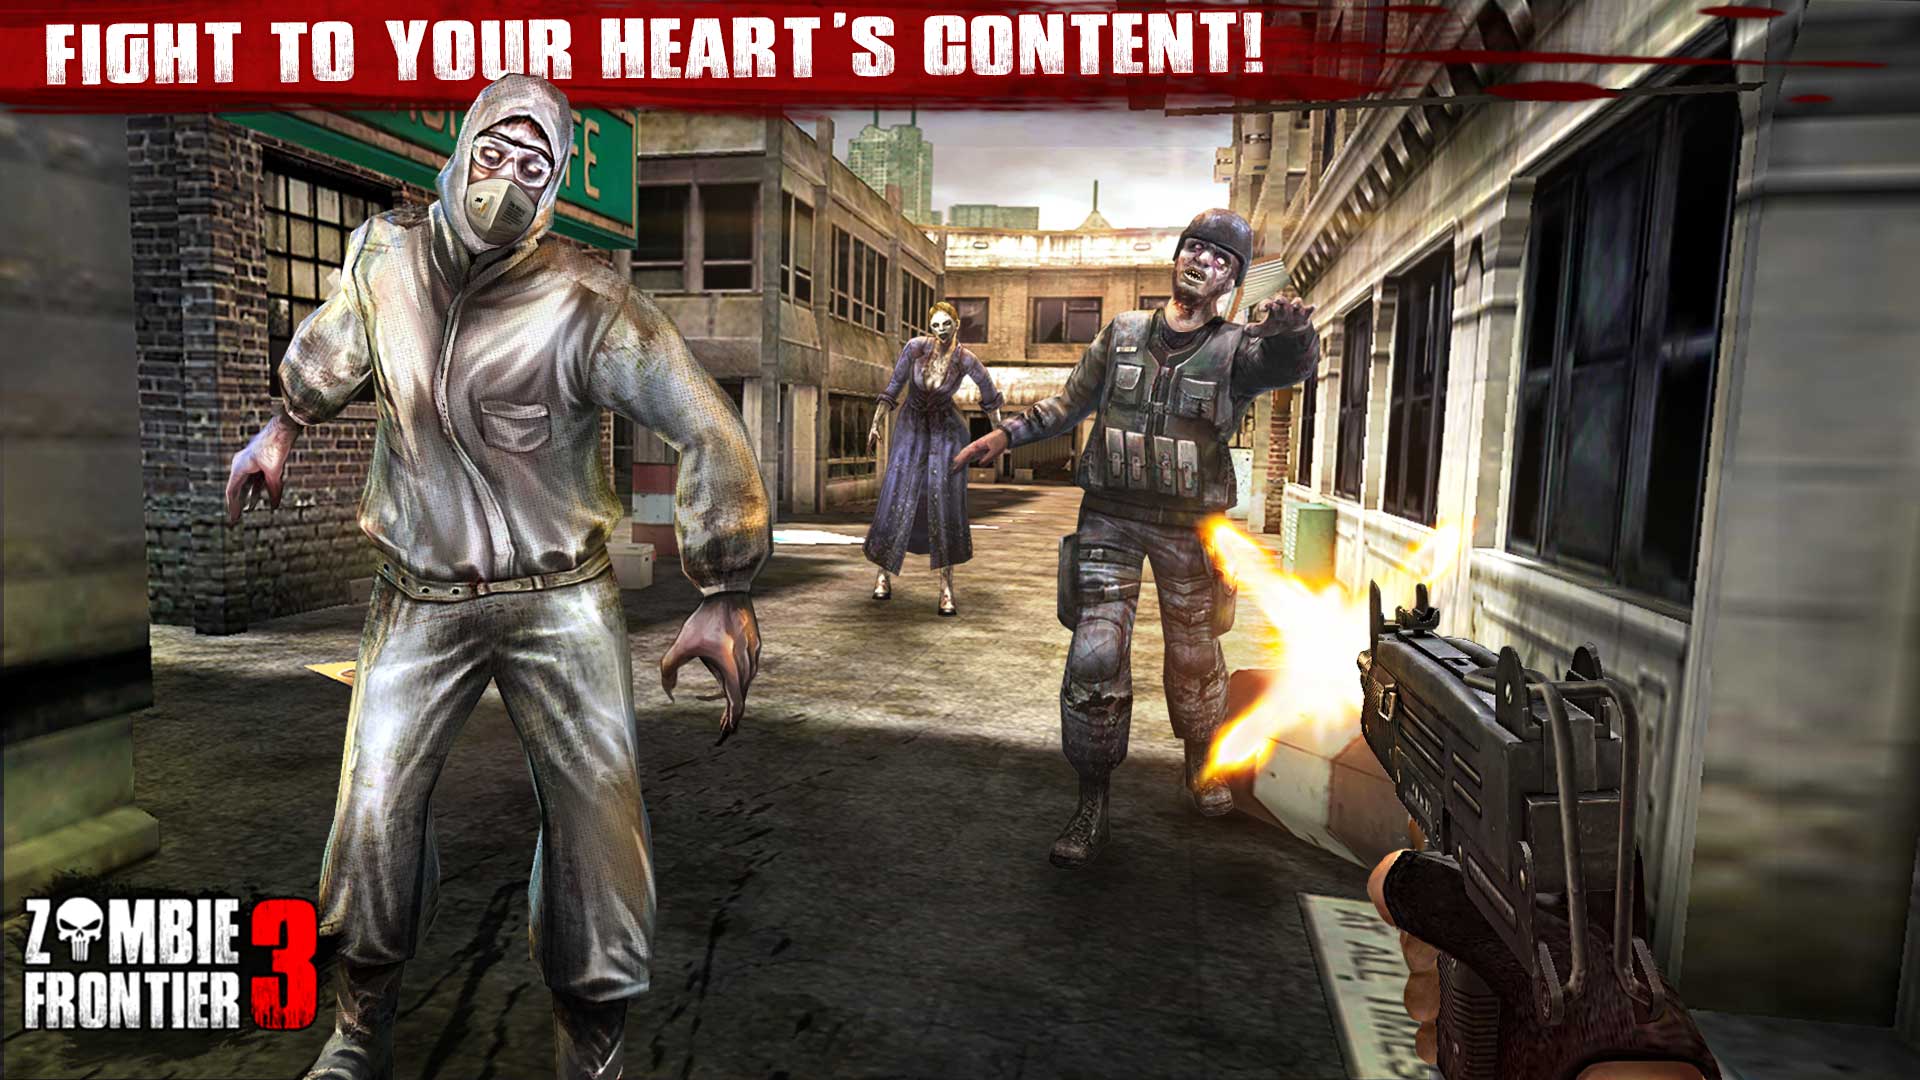 Zombie frontier cheat your way game